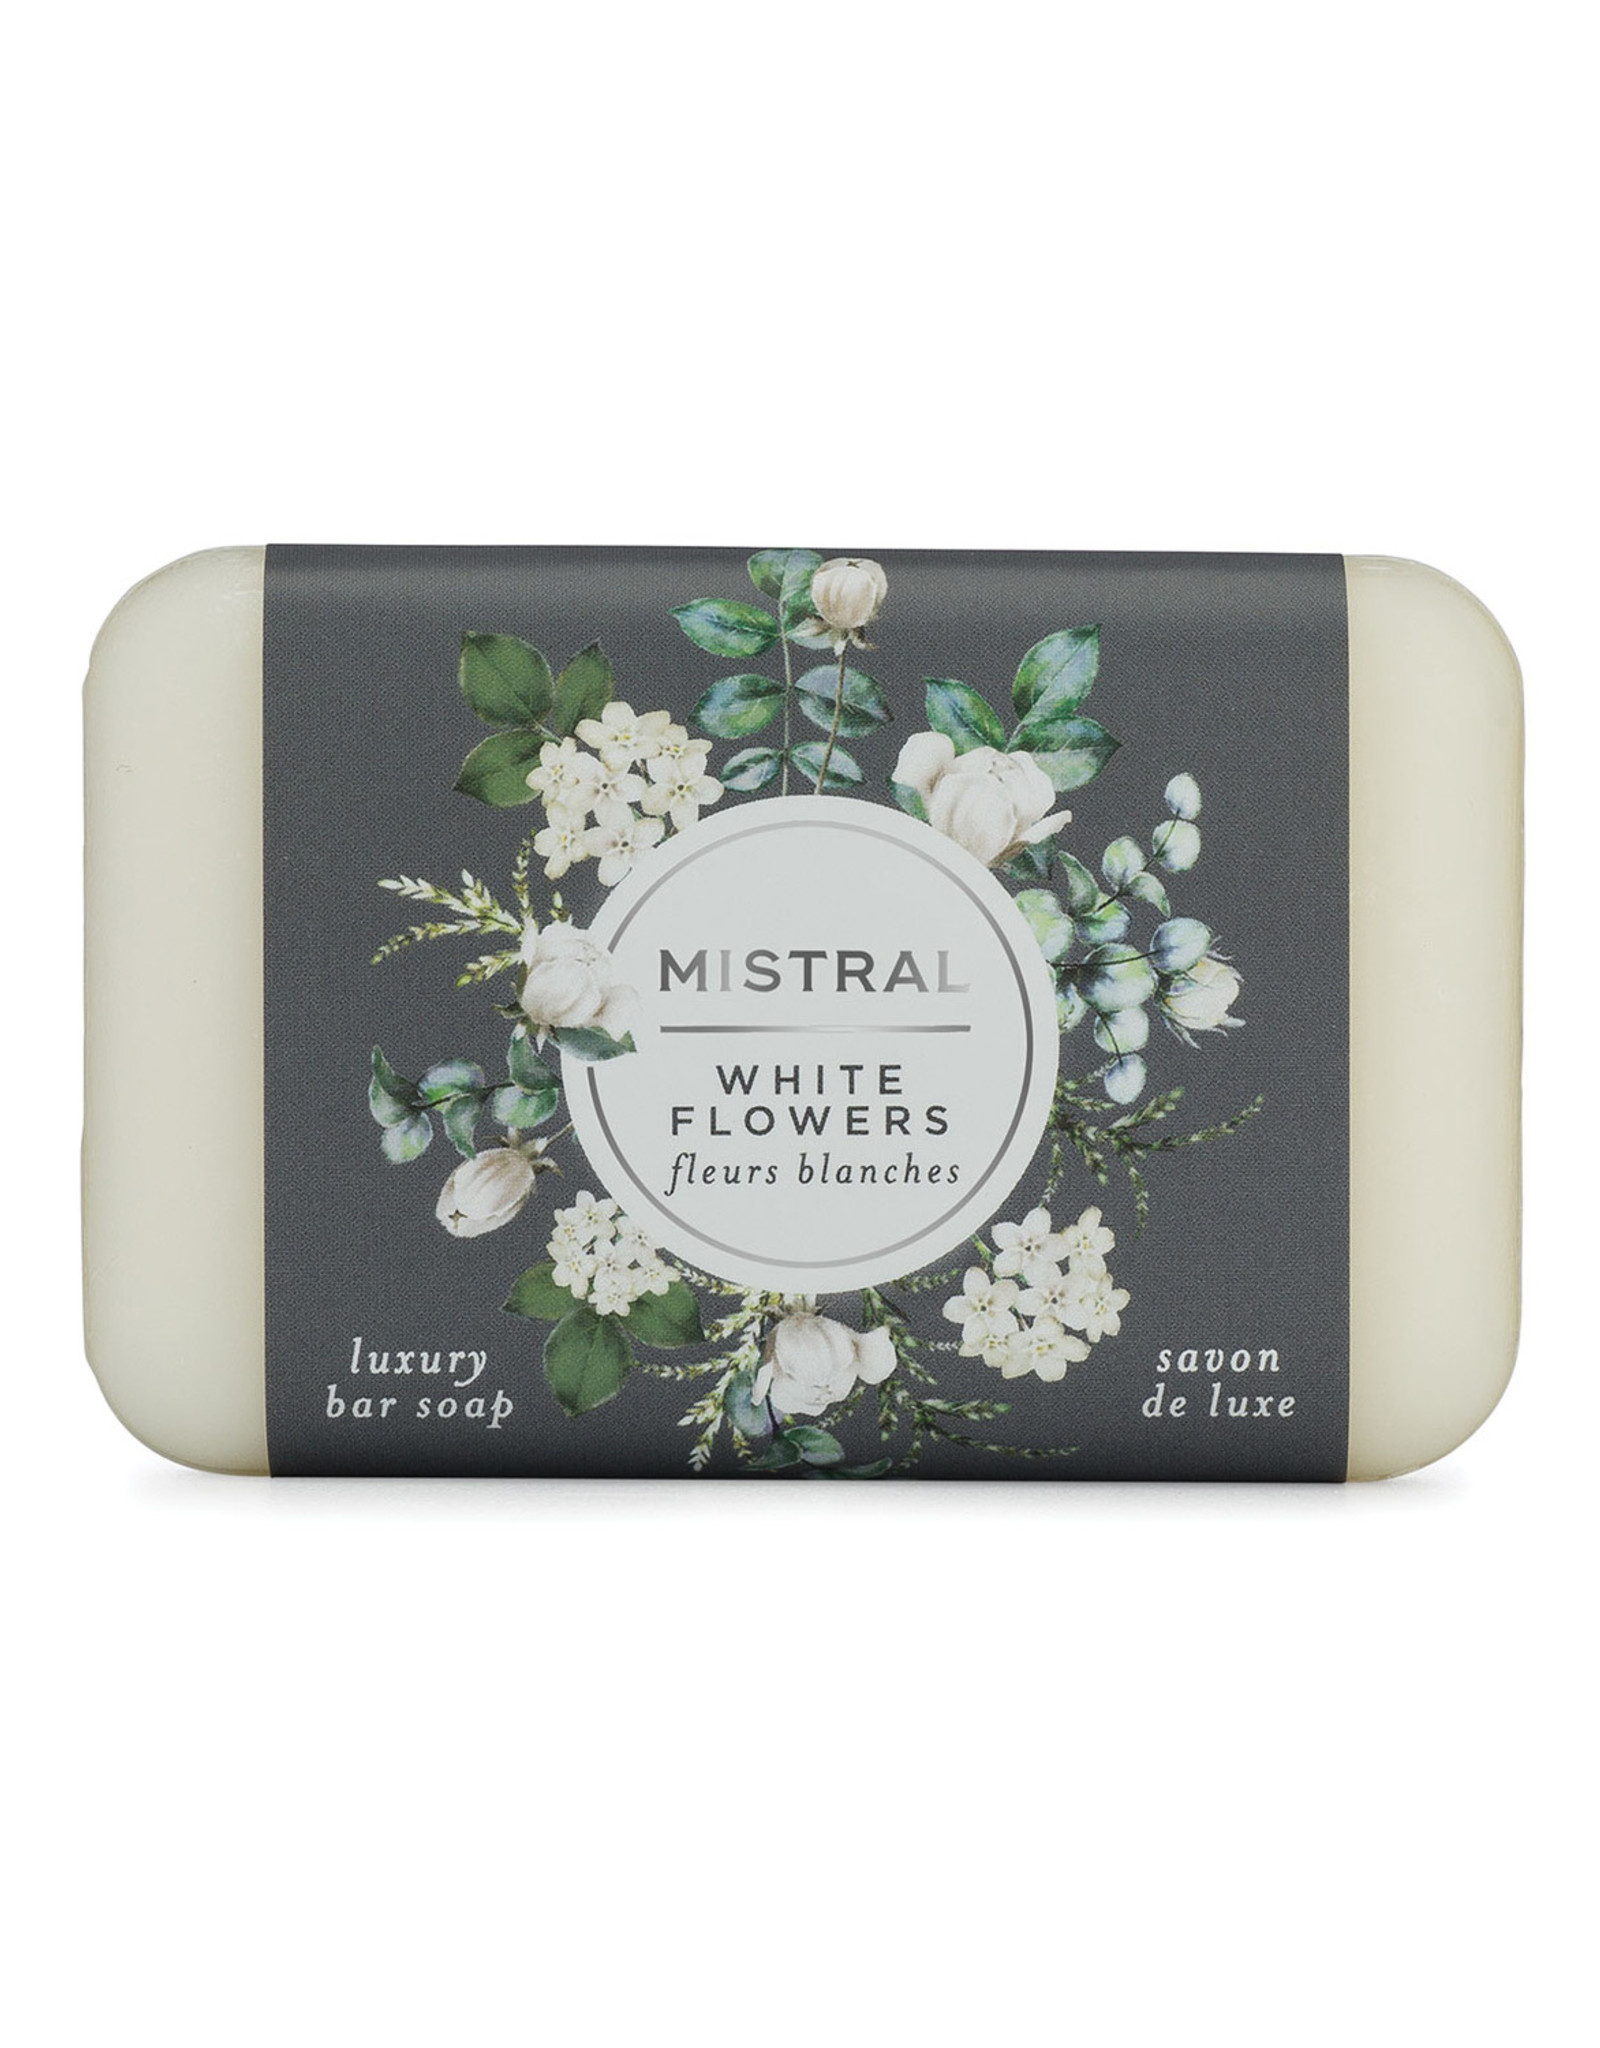 Mistral Classic French Soap Collection - White Flowers 7 oz